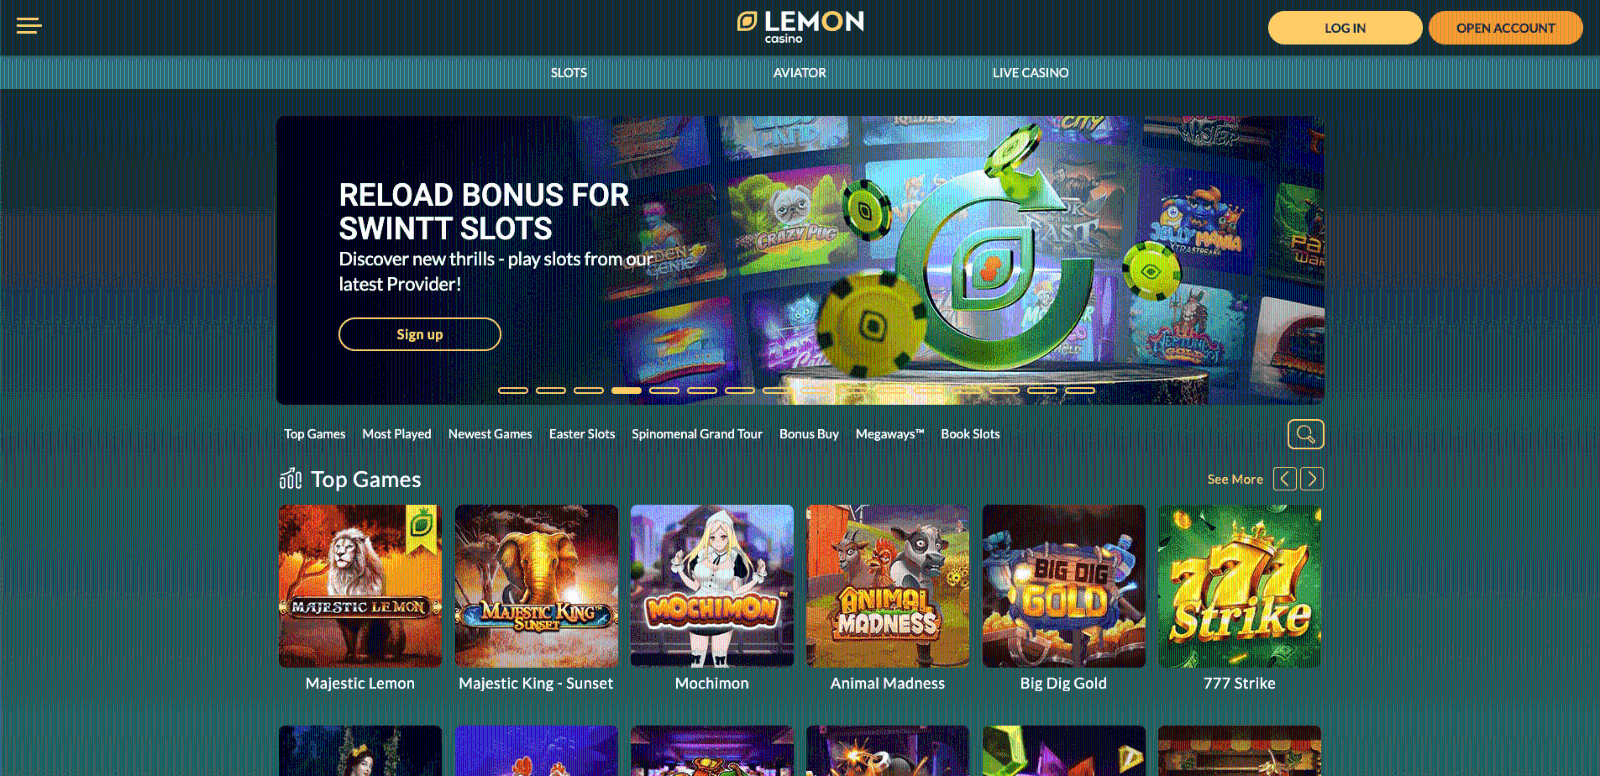 The appearance of the site Lemon Casino